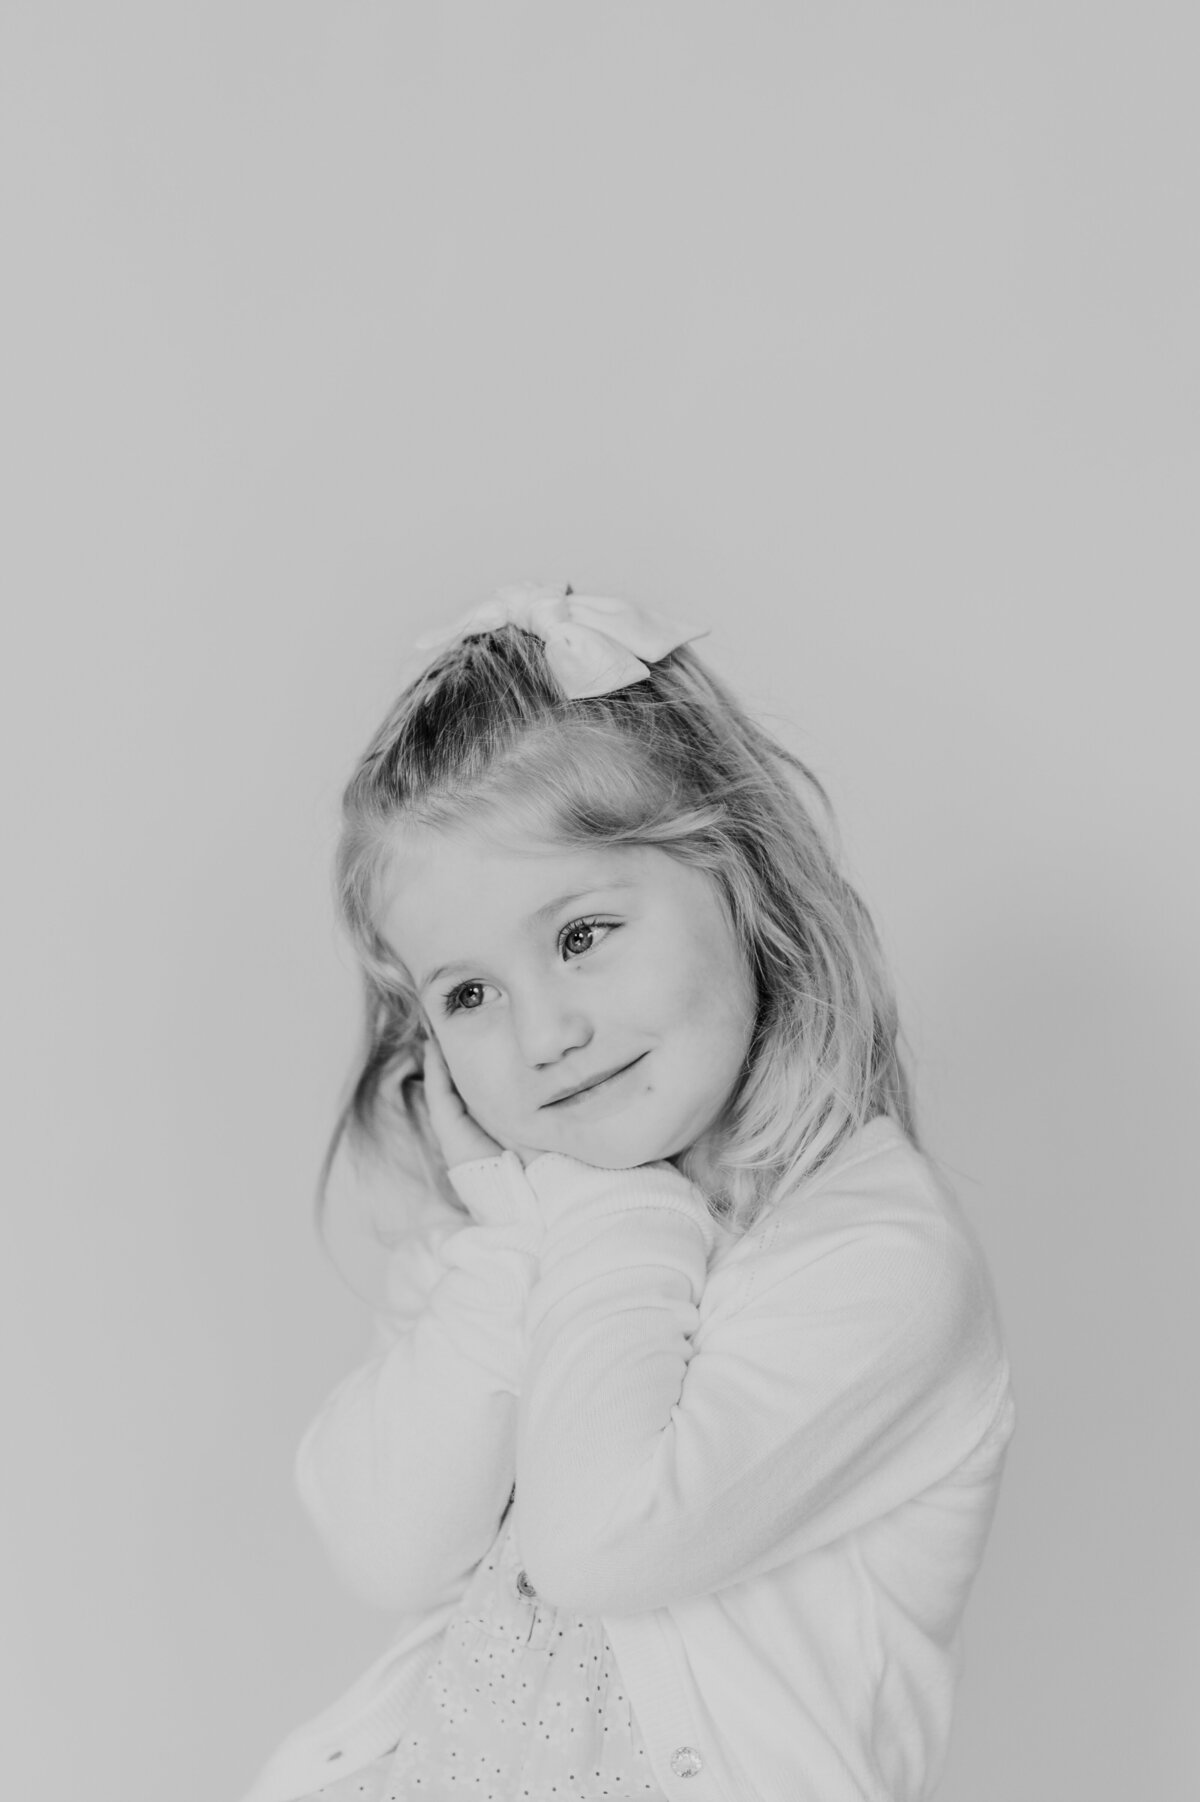 Join me for whimsical wonders in Minneapolis! My Personality Portrait Mini Sessions are designed to capture the pure essence of your child’s joy and playfulness. Book now for cherished memories!